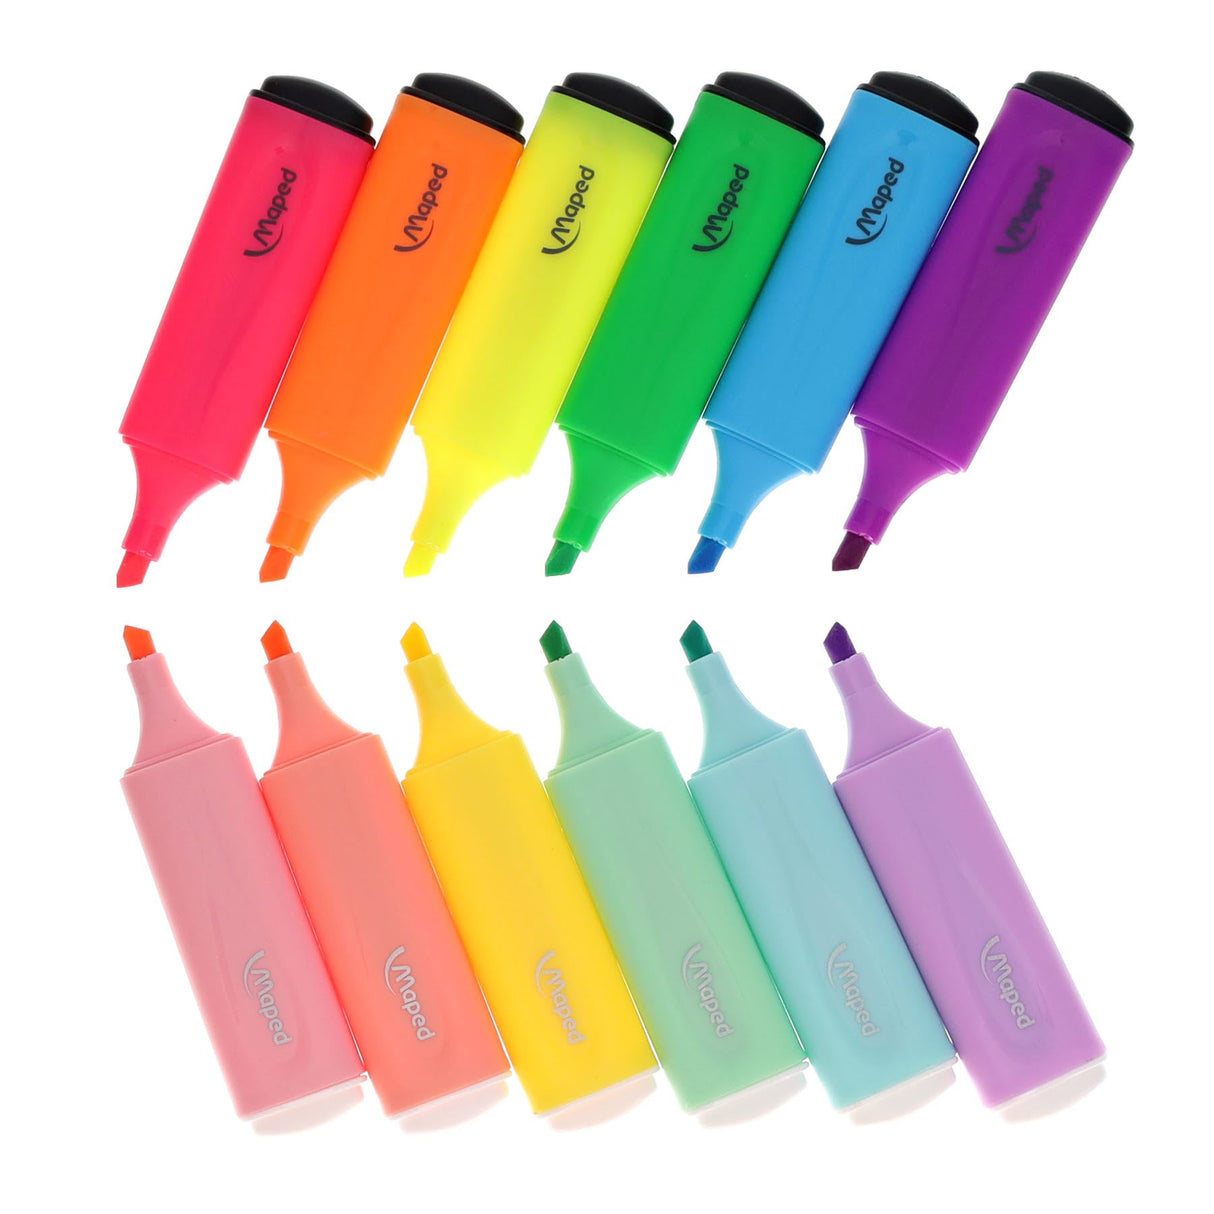 Maped Highlighters - Pack of 12-Highlighters-Maped|StationeryShop.co.uk